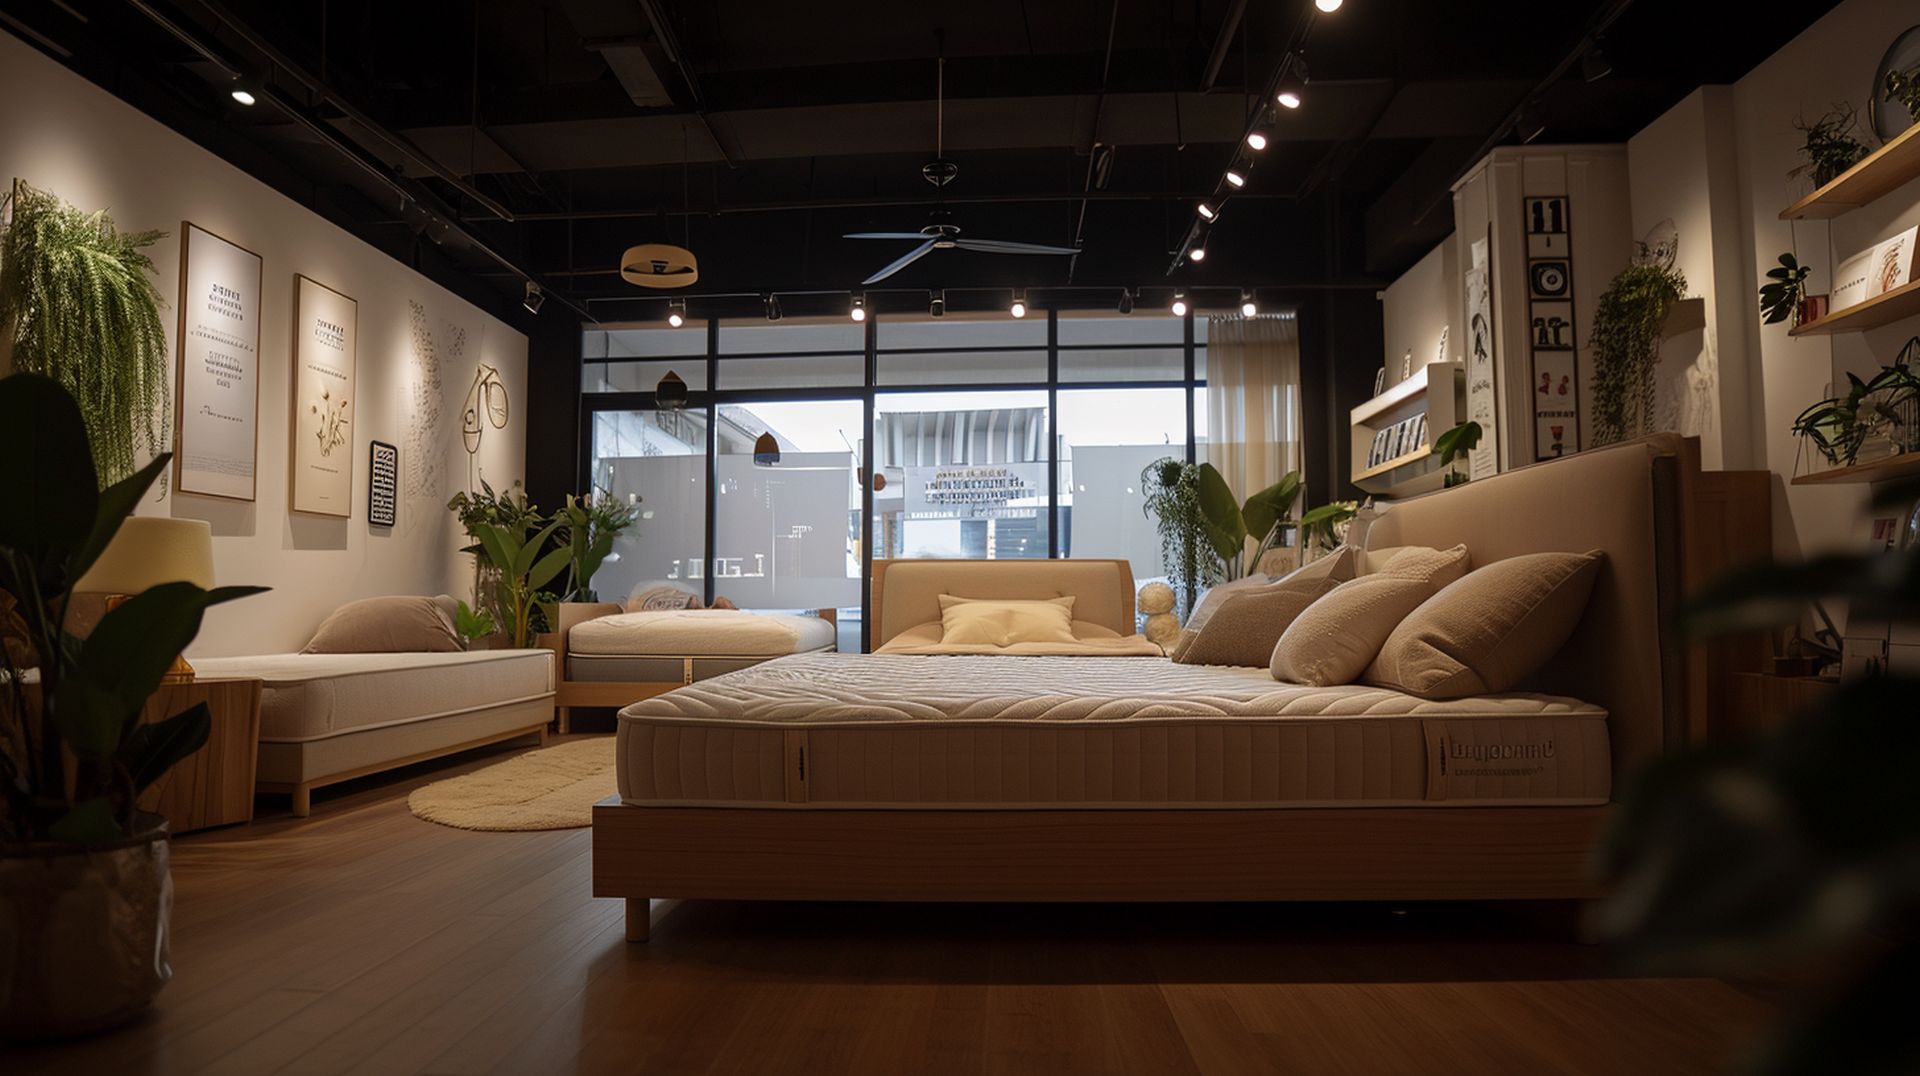 If you're looking for a new bed, mattress stores in Lake Charles offer the best customer and delivery service, financing, and warranties in Louisiana